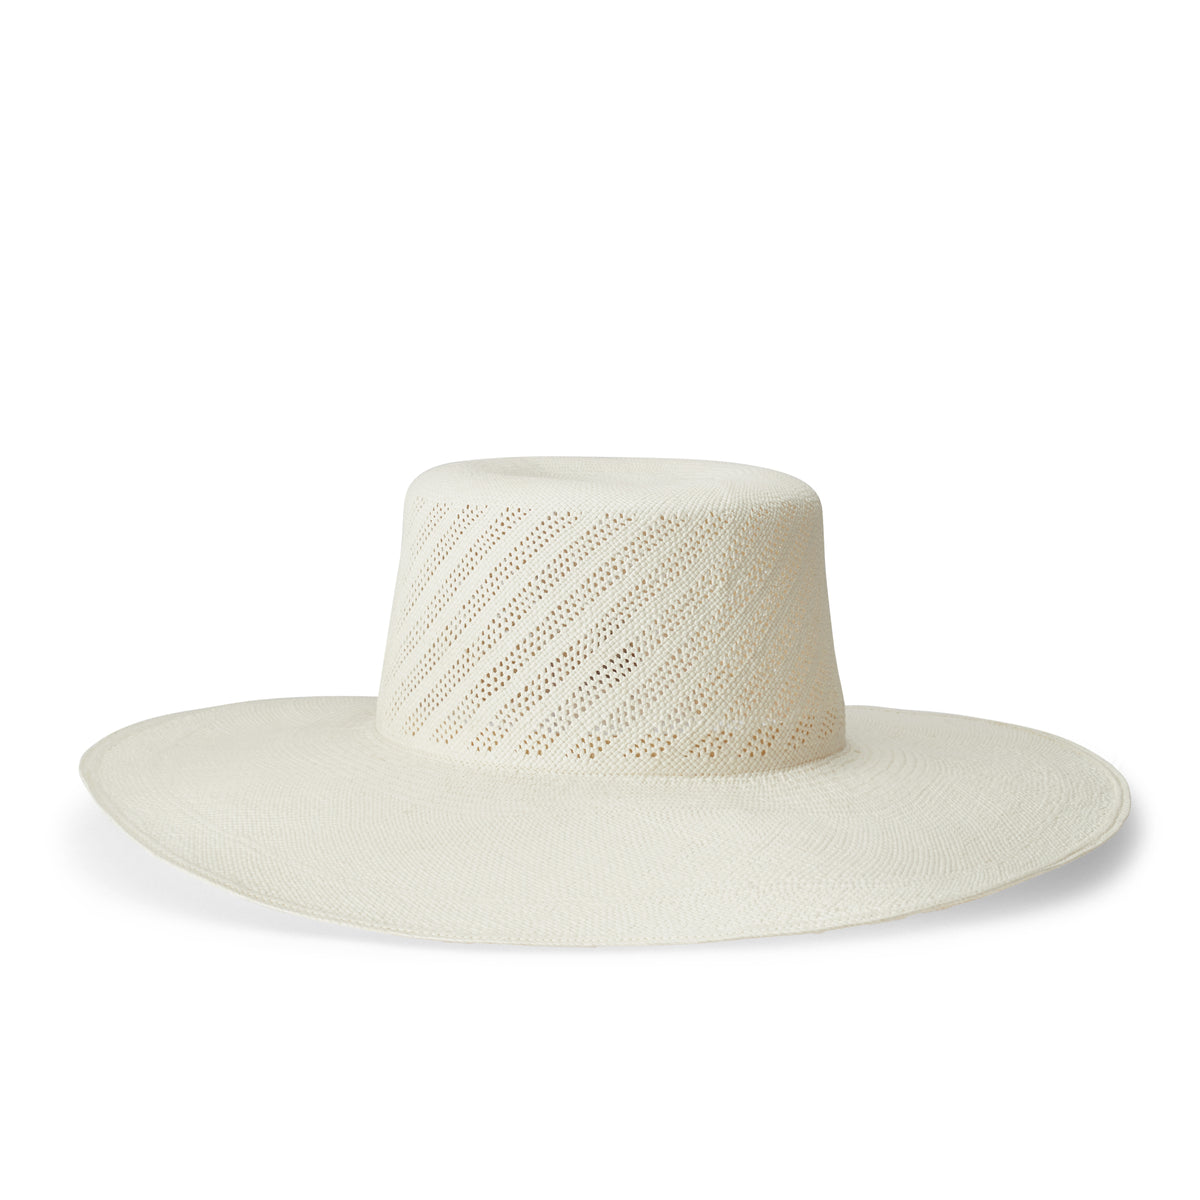 The James Bond Andrea Panama Hat - The Man With The Golden Gun Edition - by Lock &amp; Co.